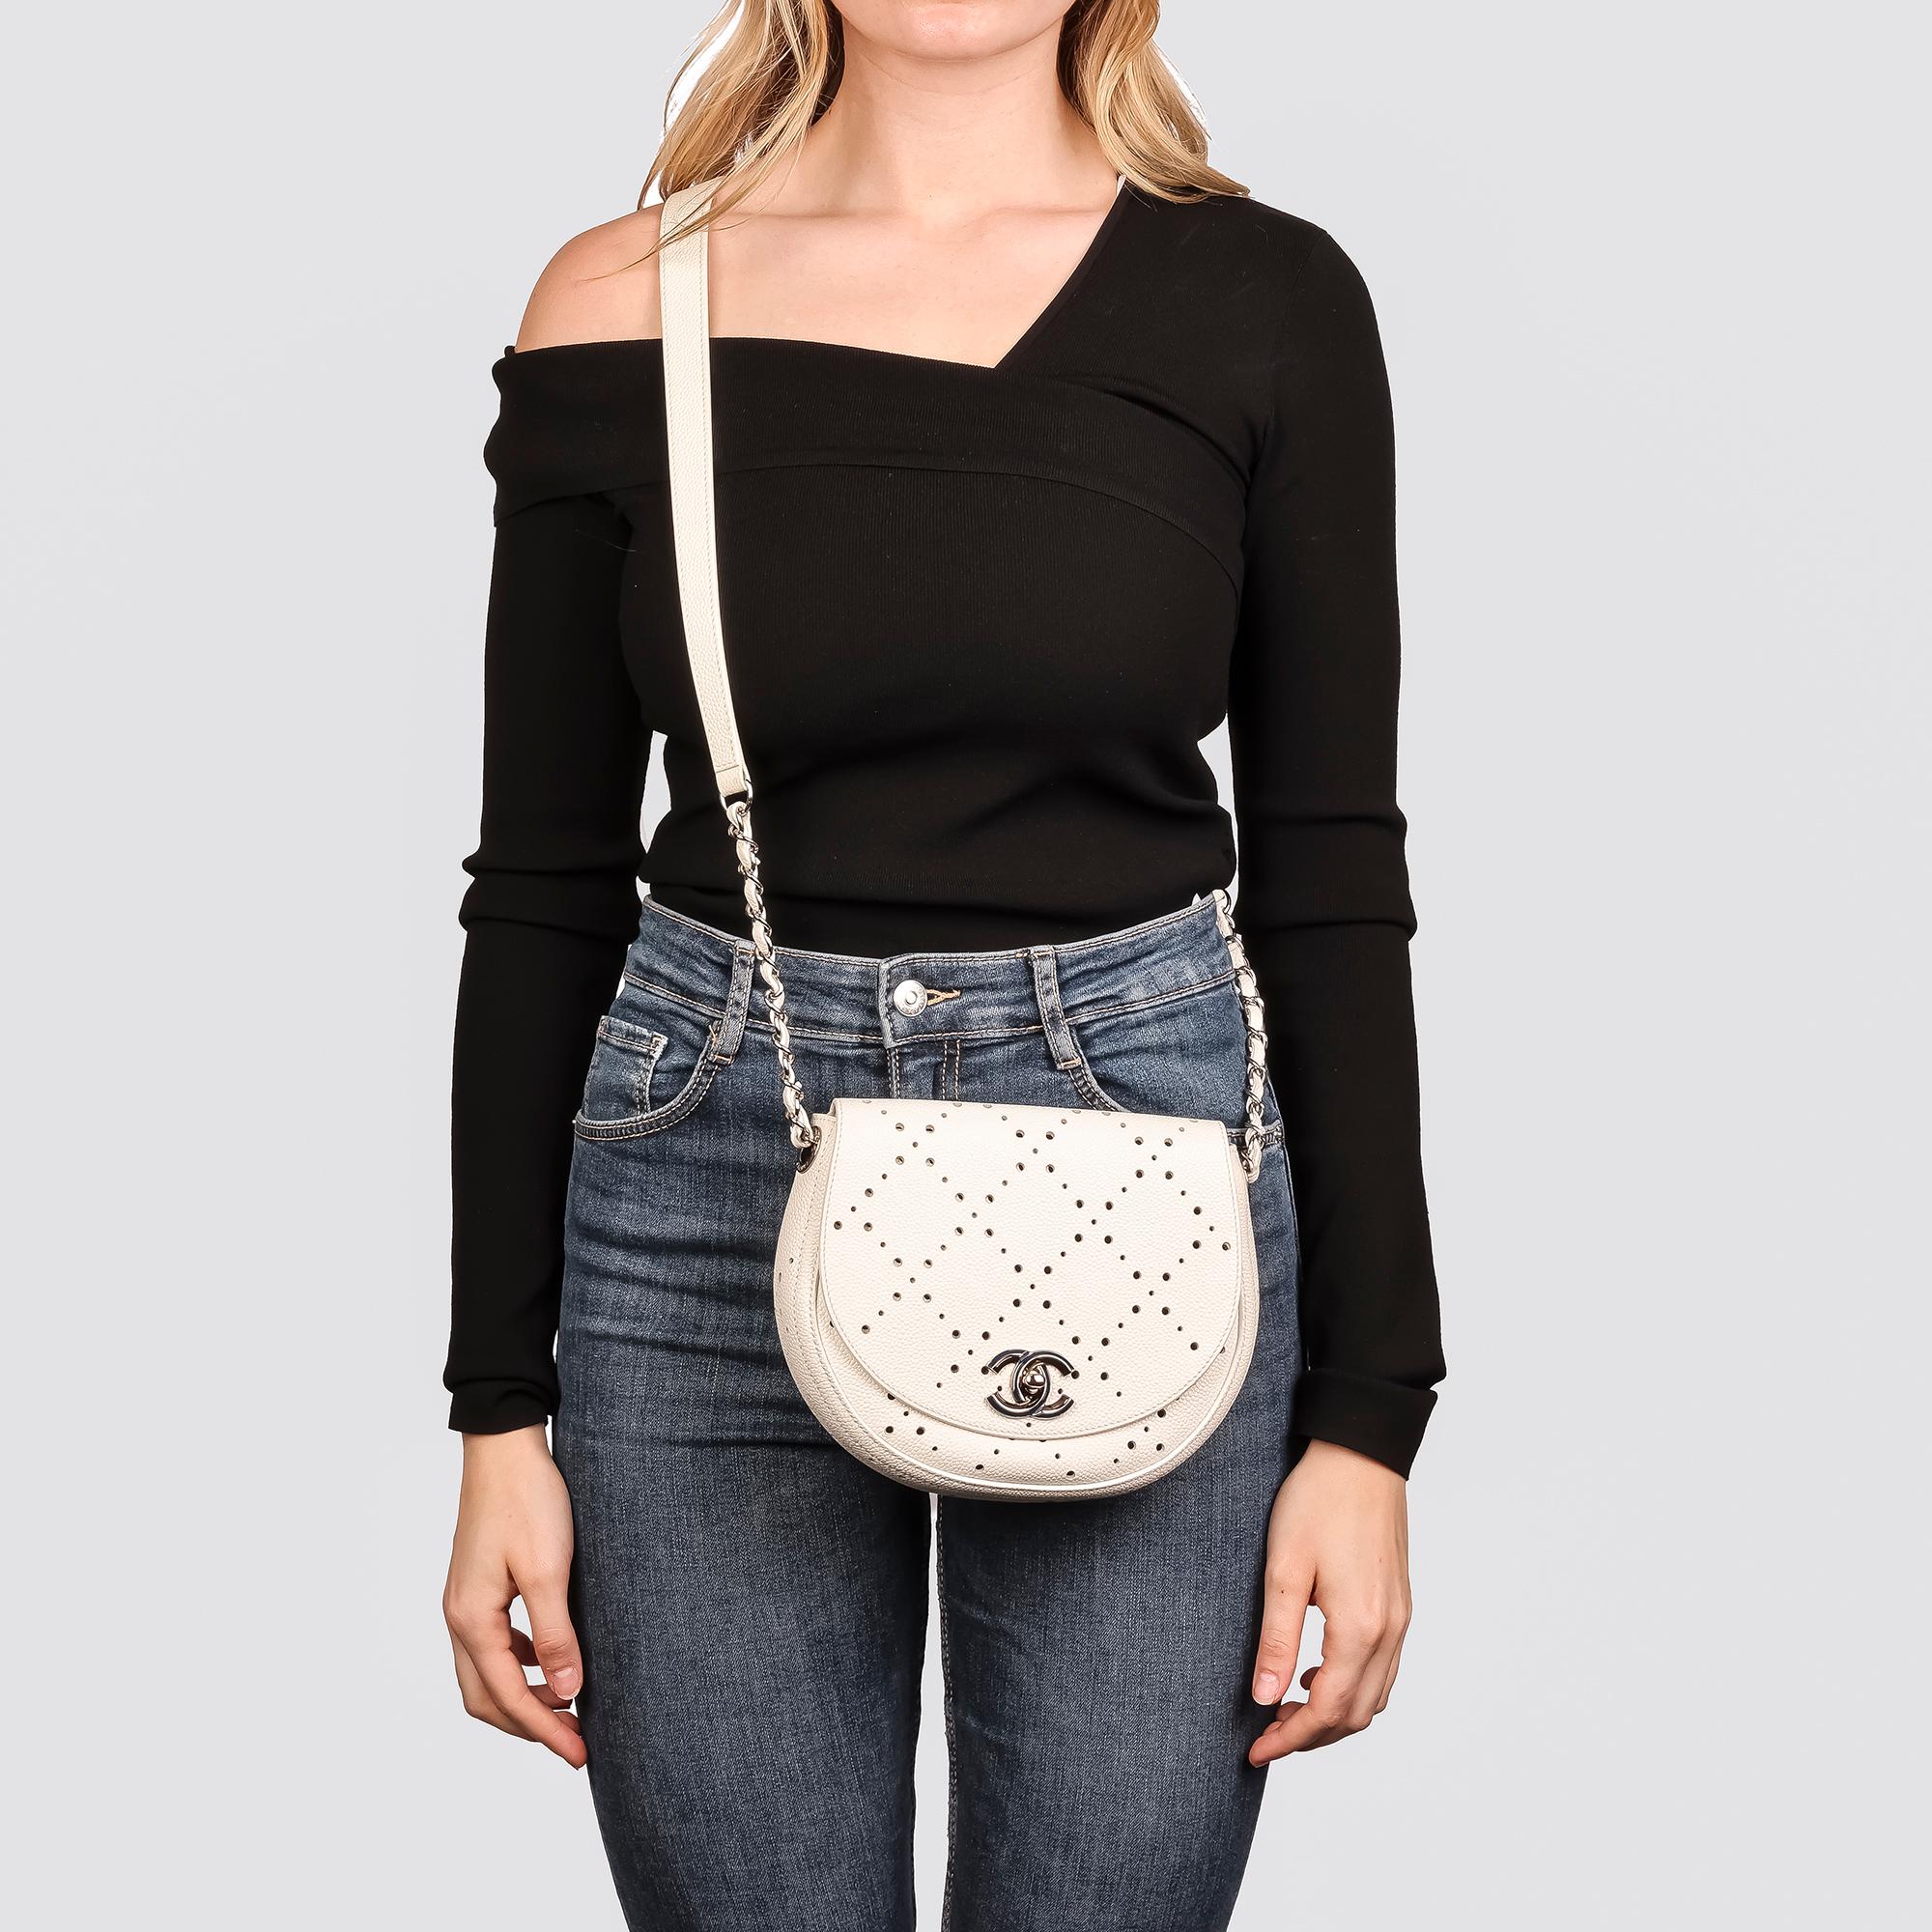 CHANEL White Perforated Caviar Leather CC Perforated Shoulder Bag For Sale 6